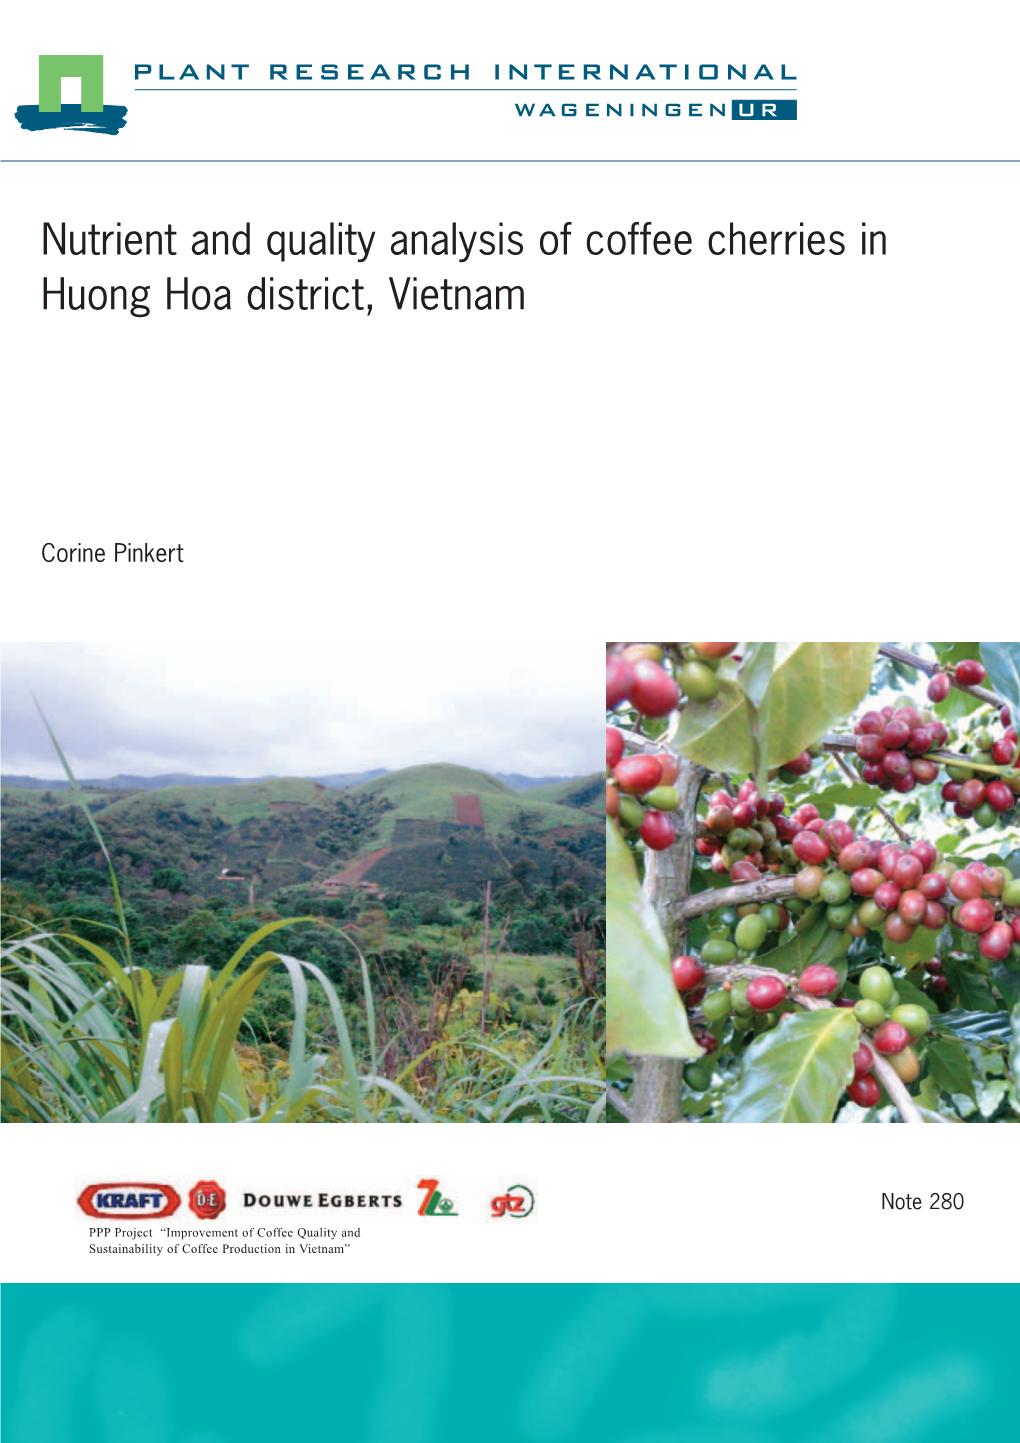 Nutrient and Quality Analysis of Coffee Cherries in Huong Hoa District, Vietnam